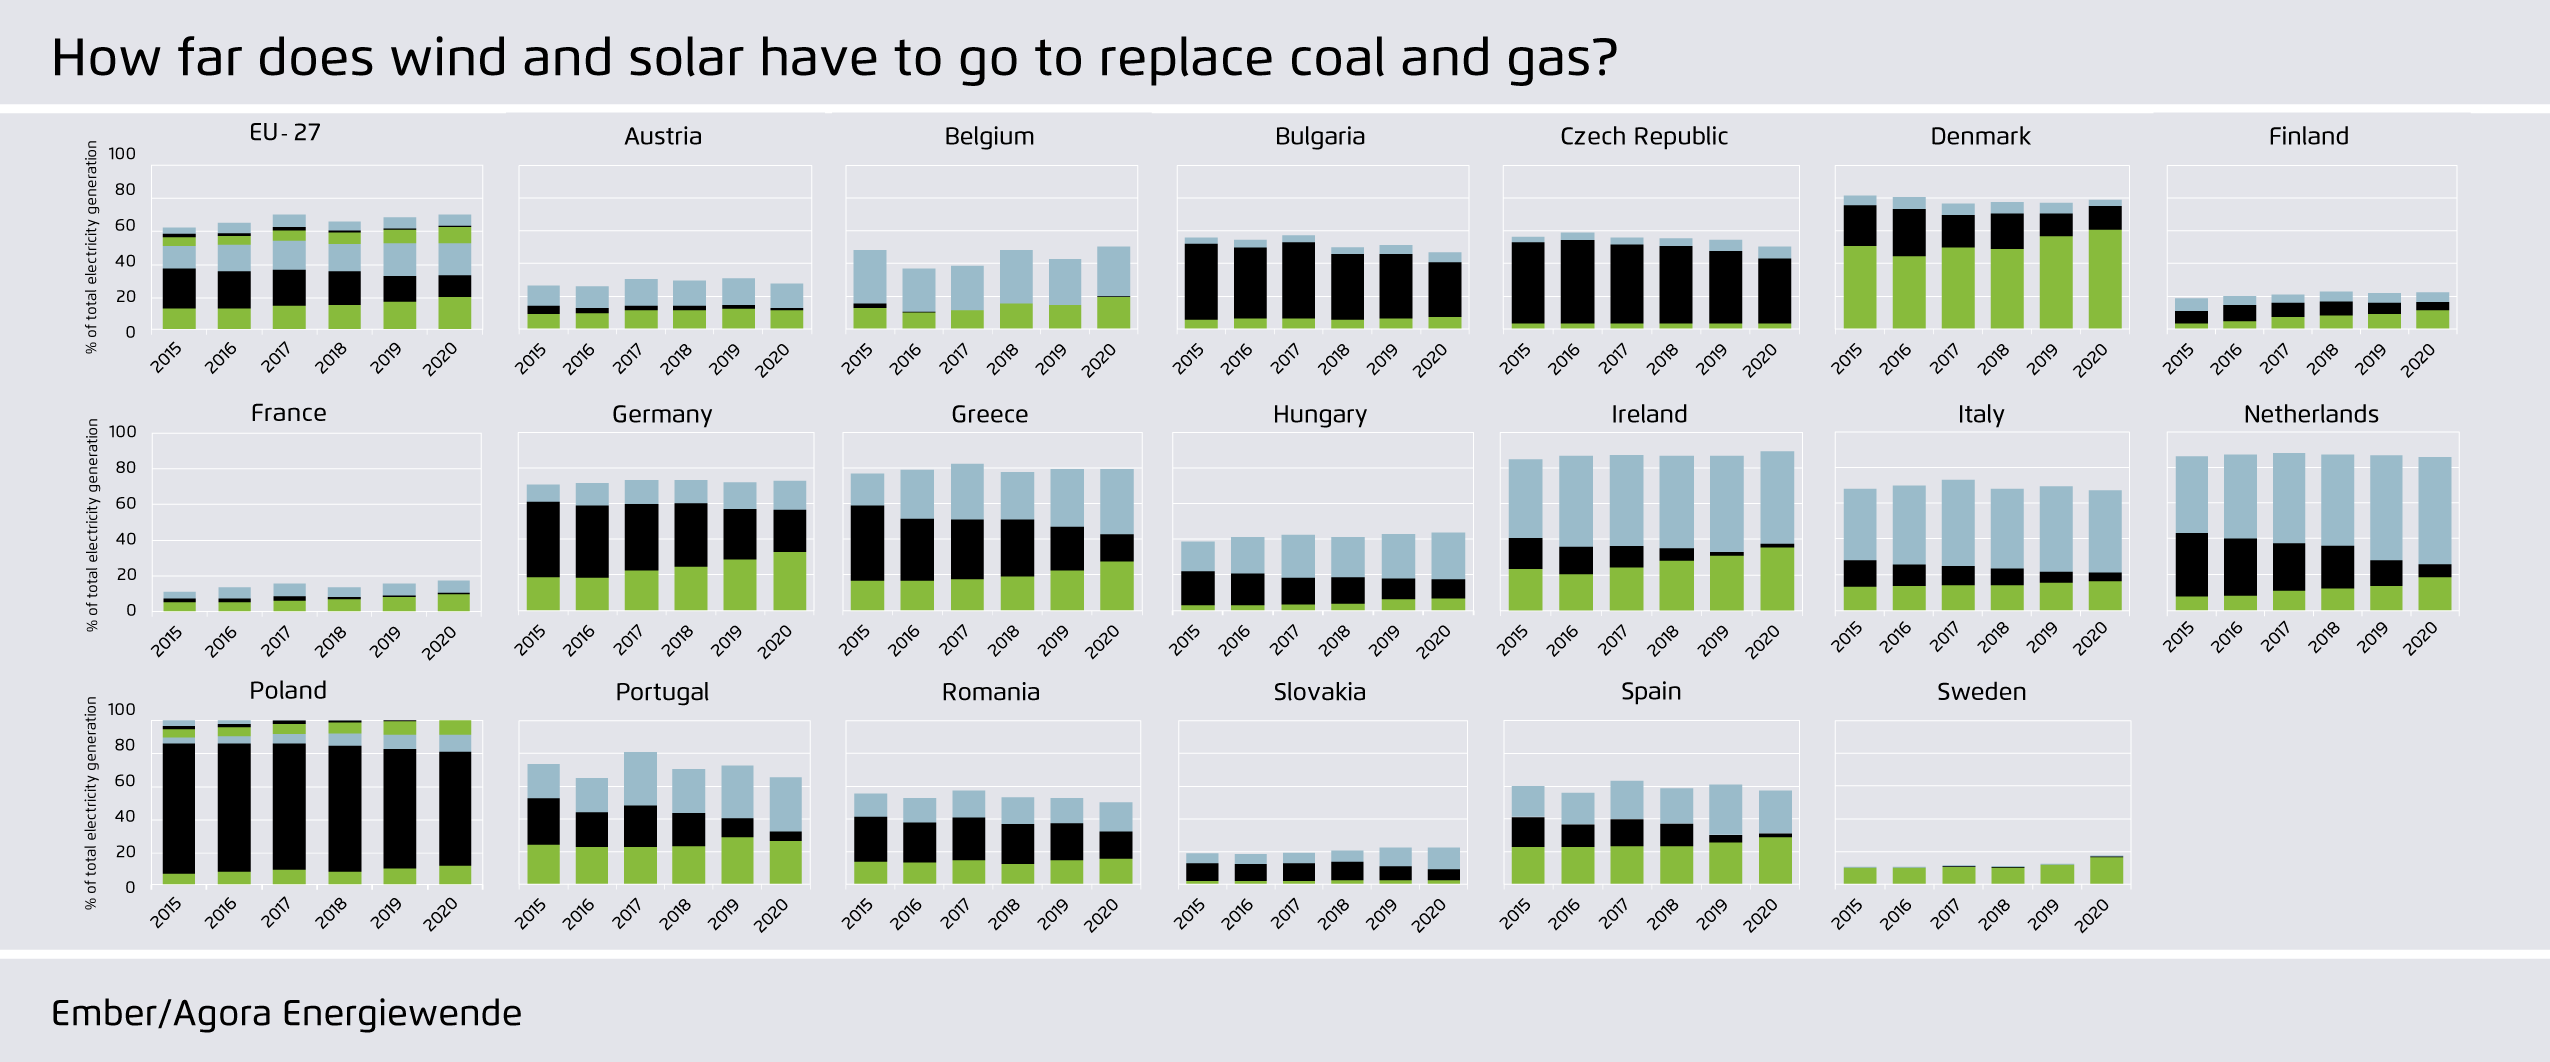 Preview for How far does wind and solar have to go to replace coal and gas?